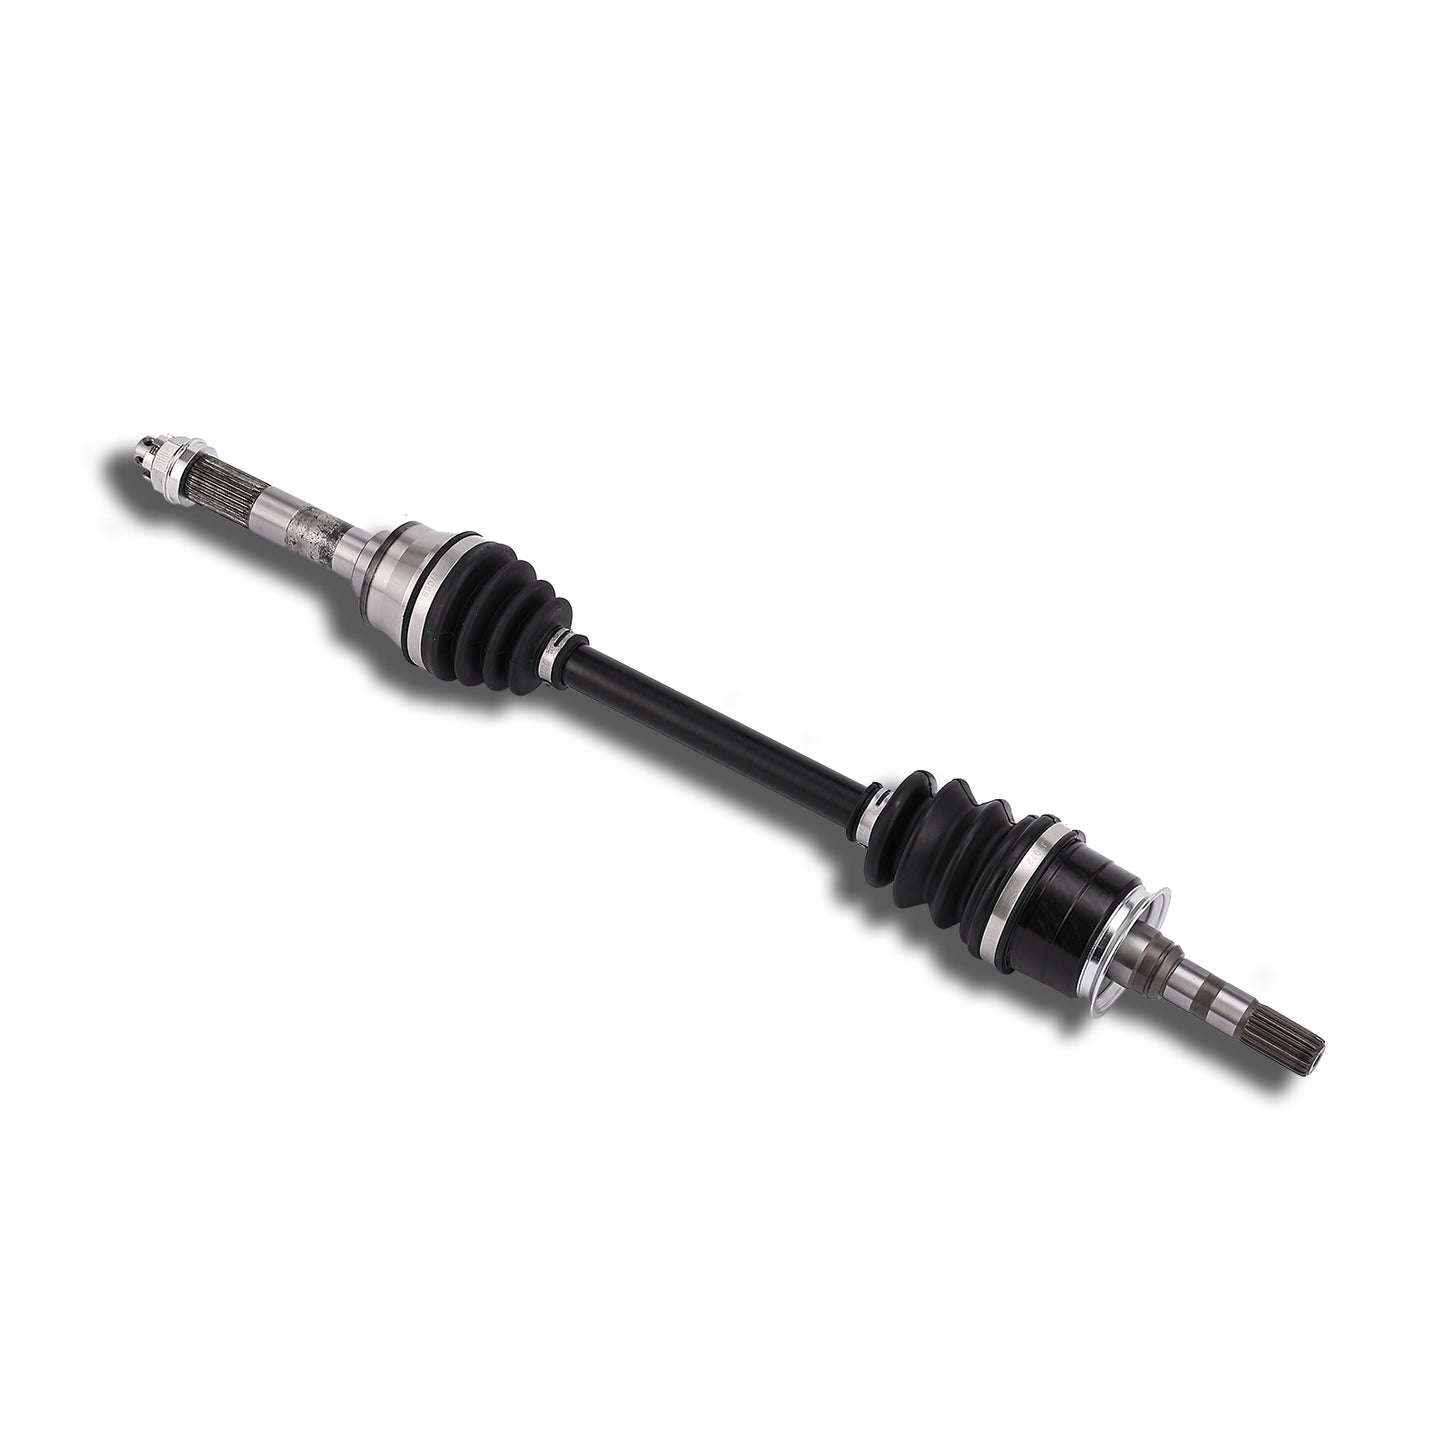 2 CAM-KW305 Front Left Drive Shaft CV Axle Compatible with KAWASAKI (2000-2002) Mule 2510 BF / (2001-2008) Mule 3010 BF / (2009-2019) Mule 4010 BF